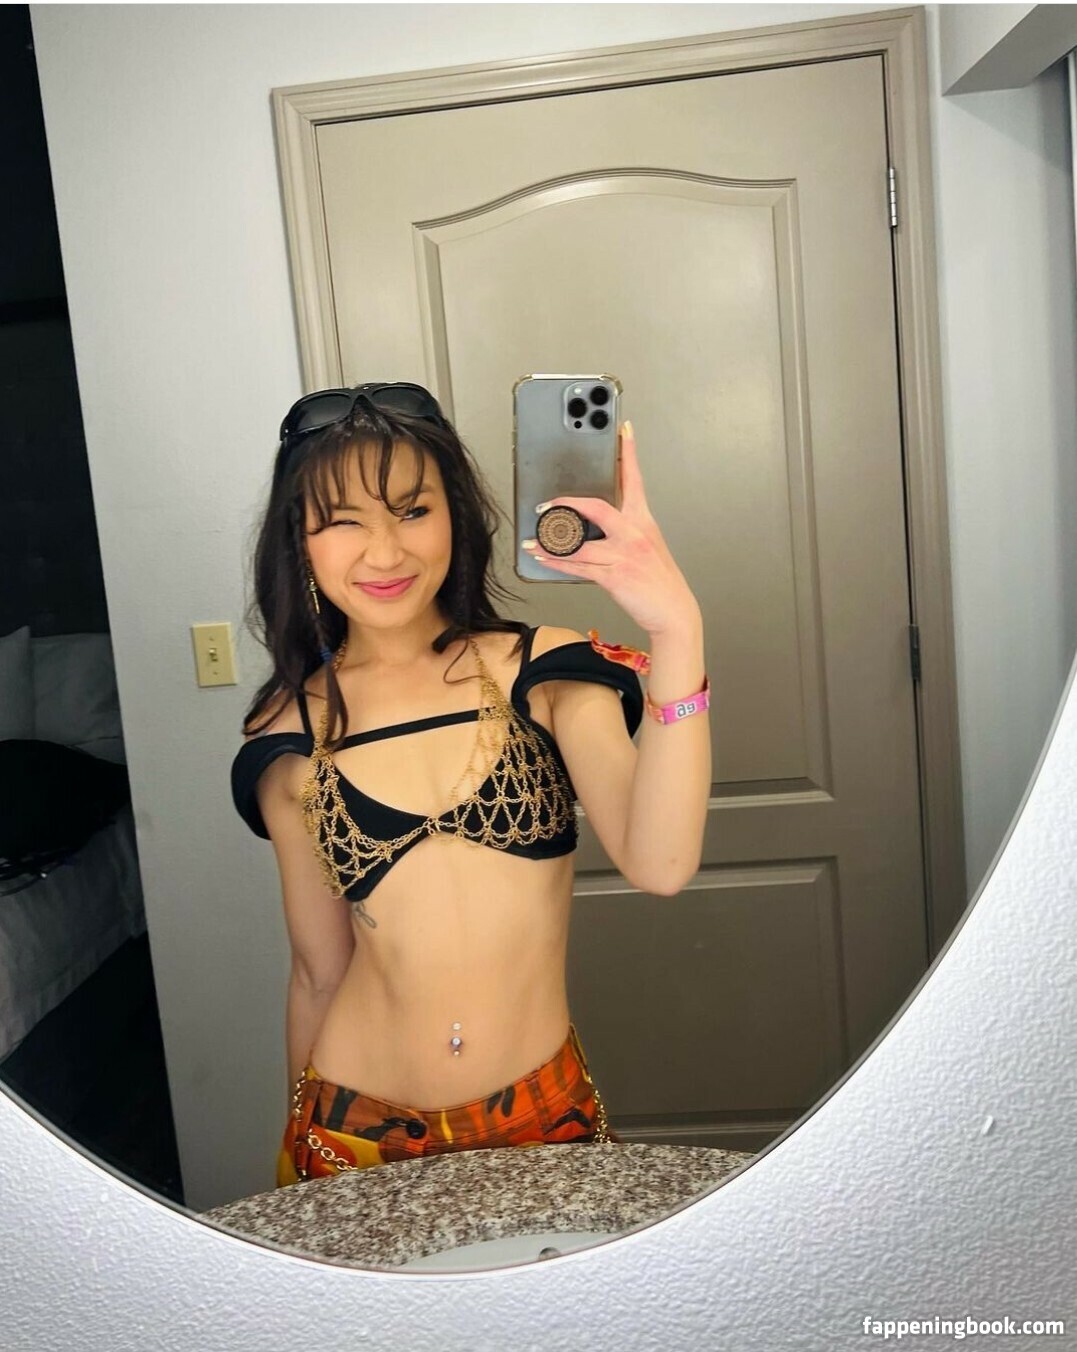 jeannie elise mai the fappening fappeningbook